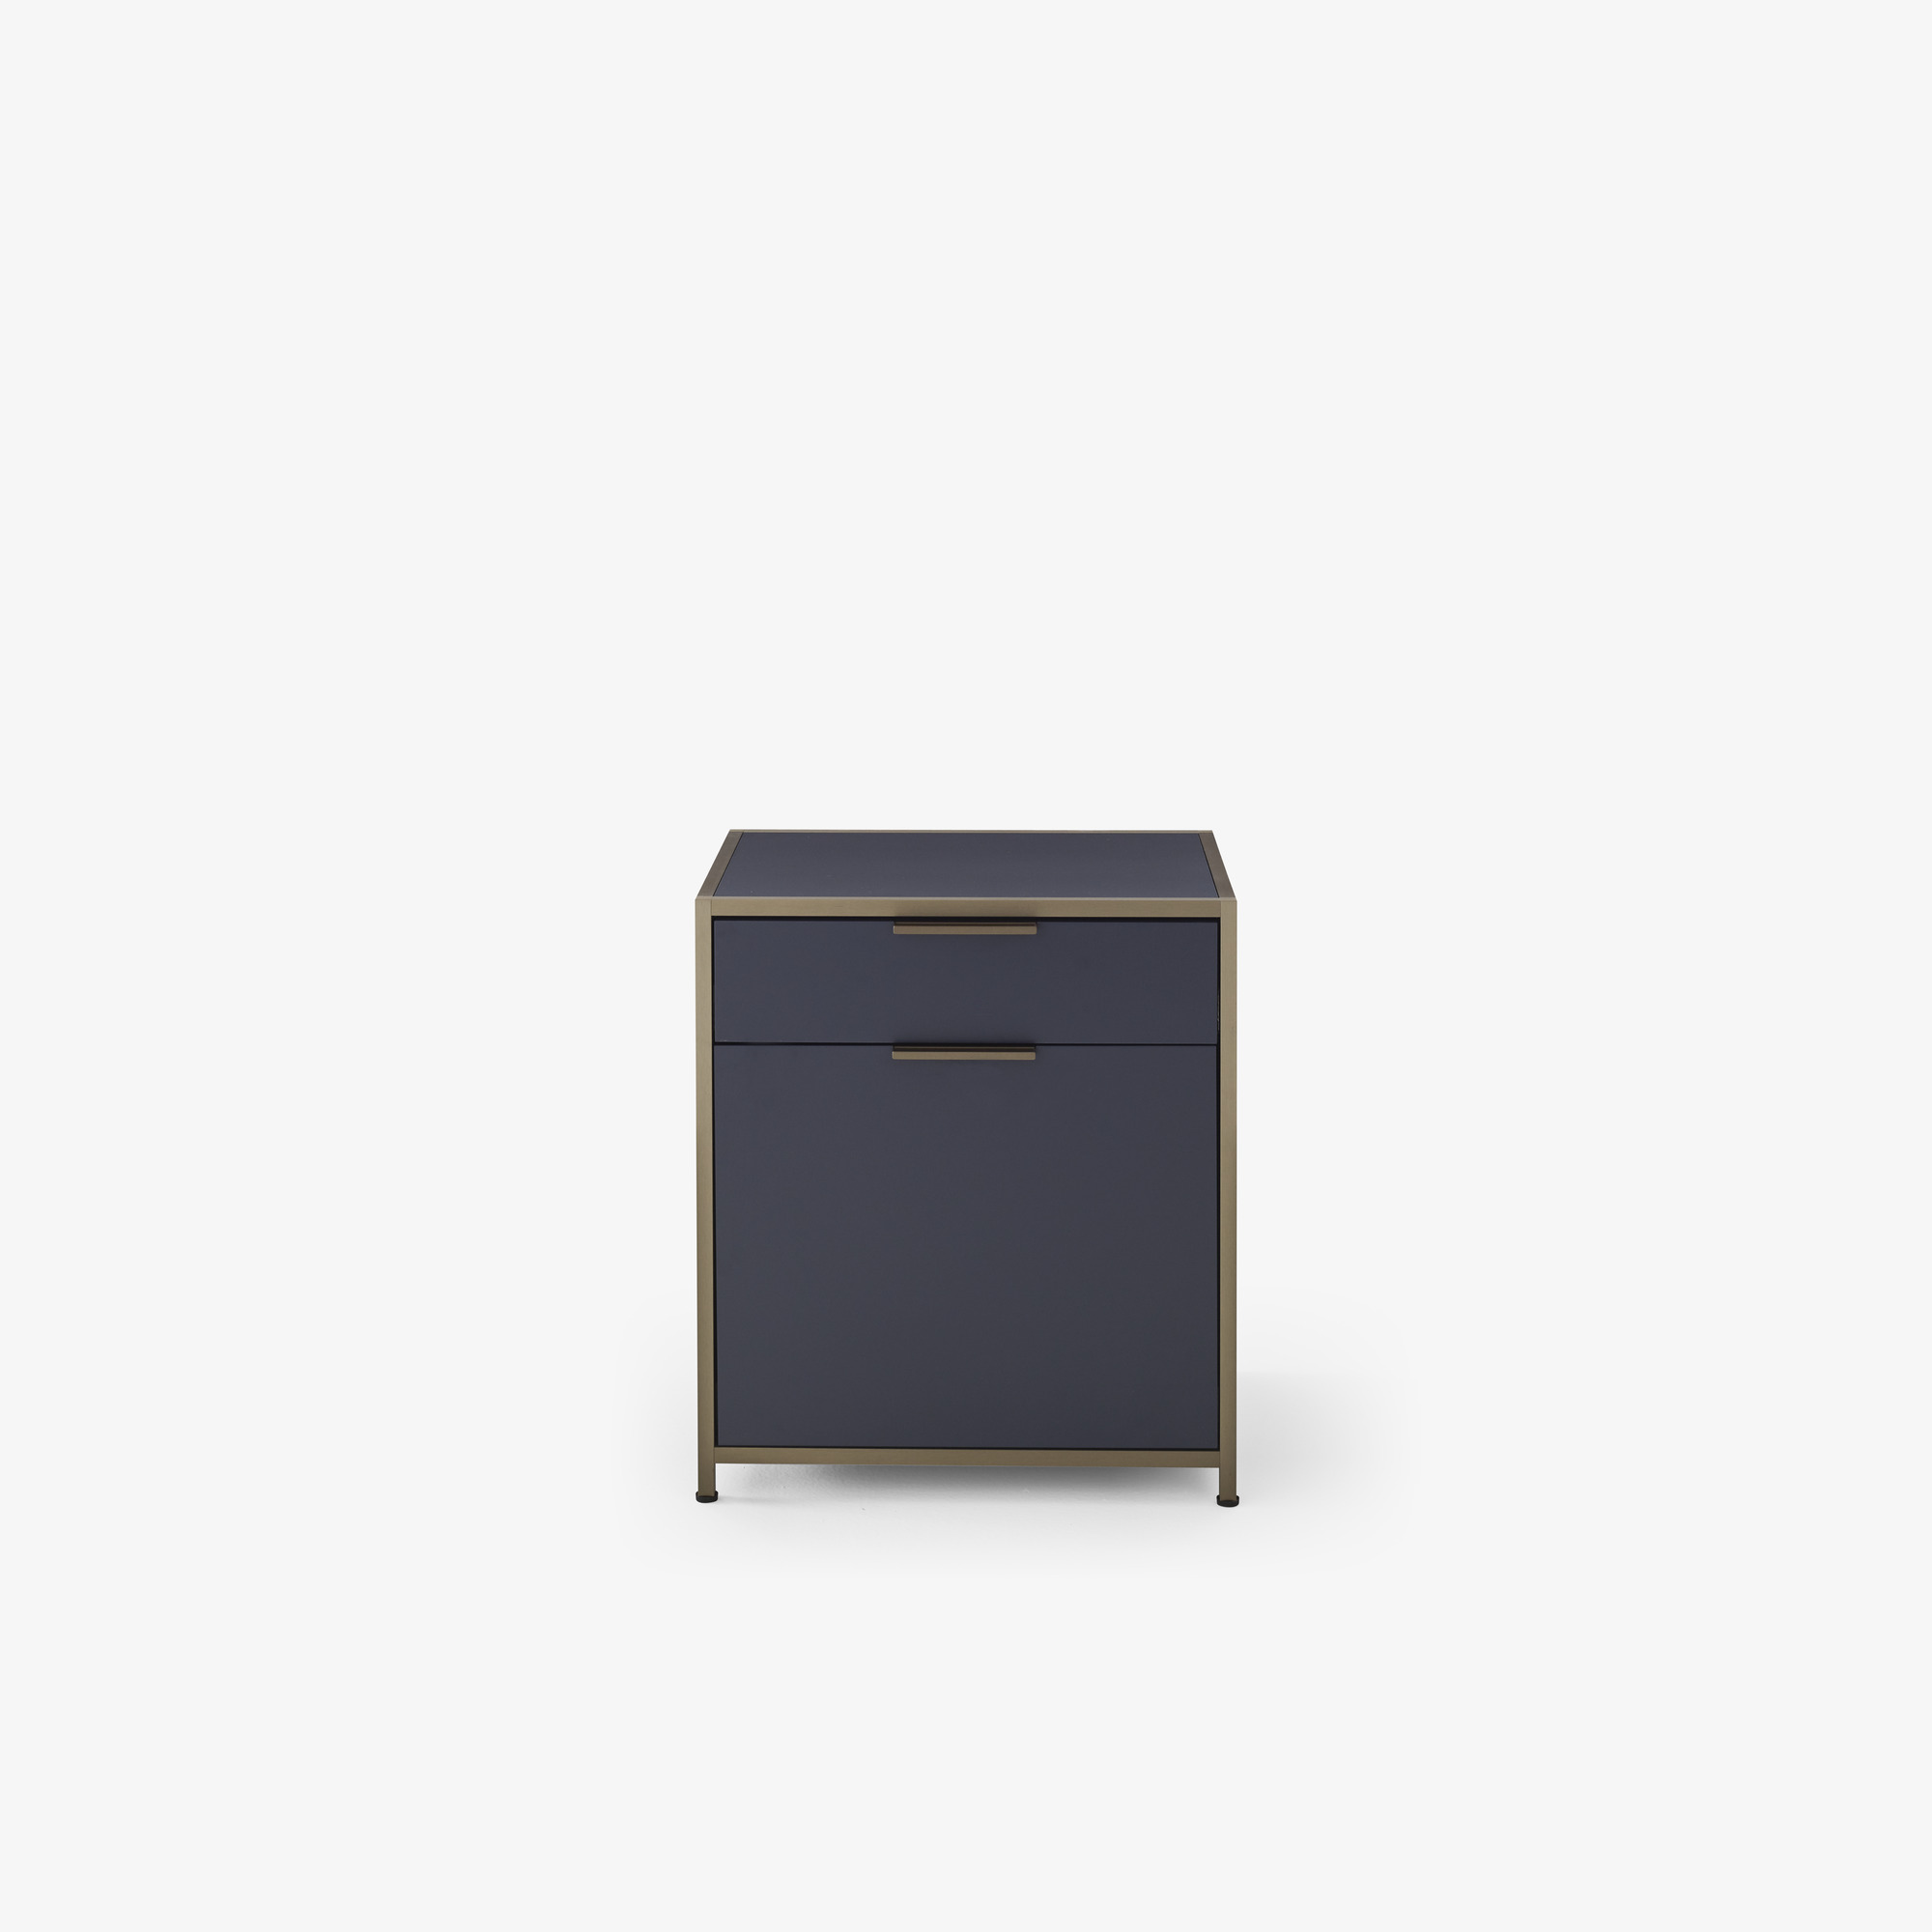 Image Filing cabinet for hanging files - 2 drawers 2 drawers (of which 1 for hanging files) 1